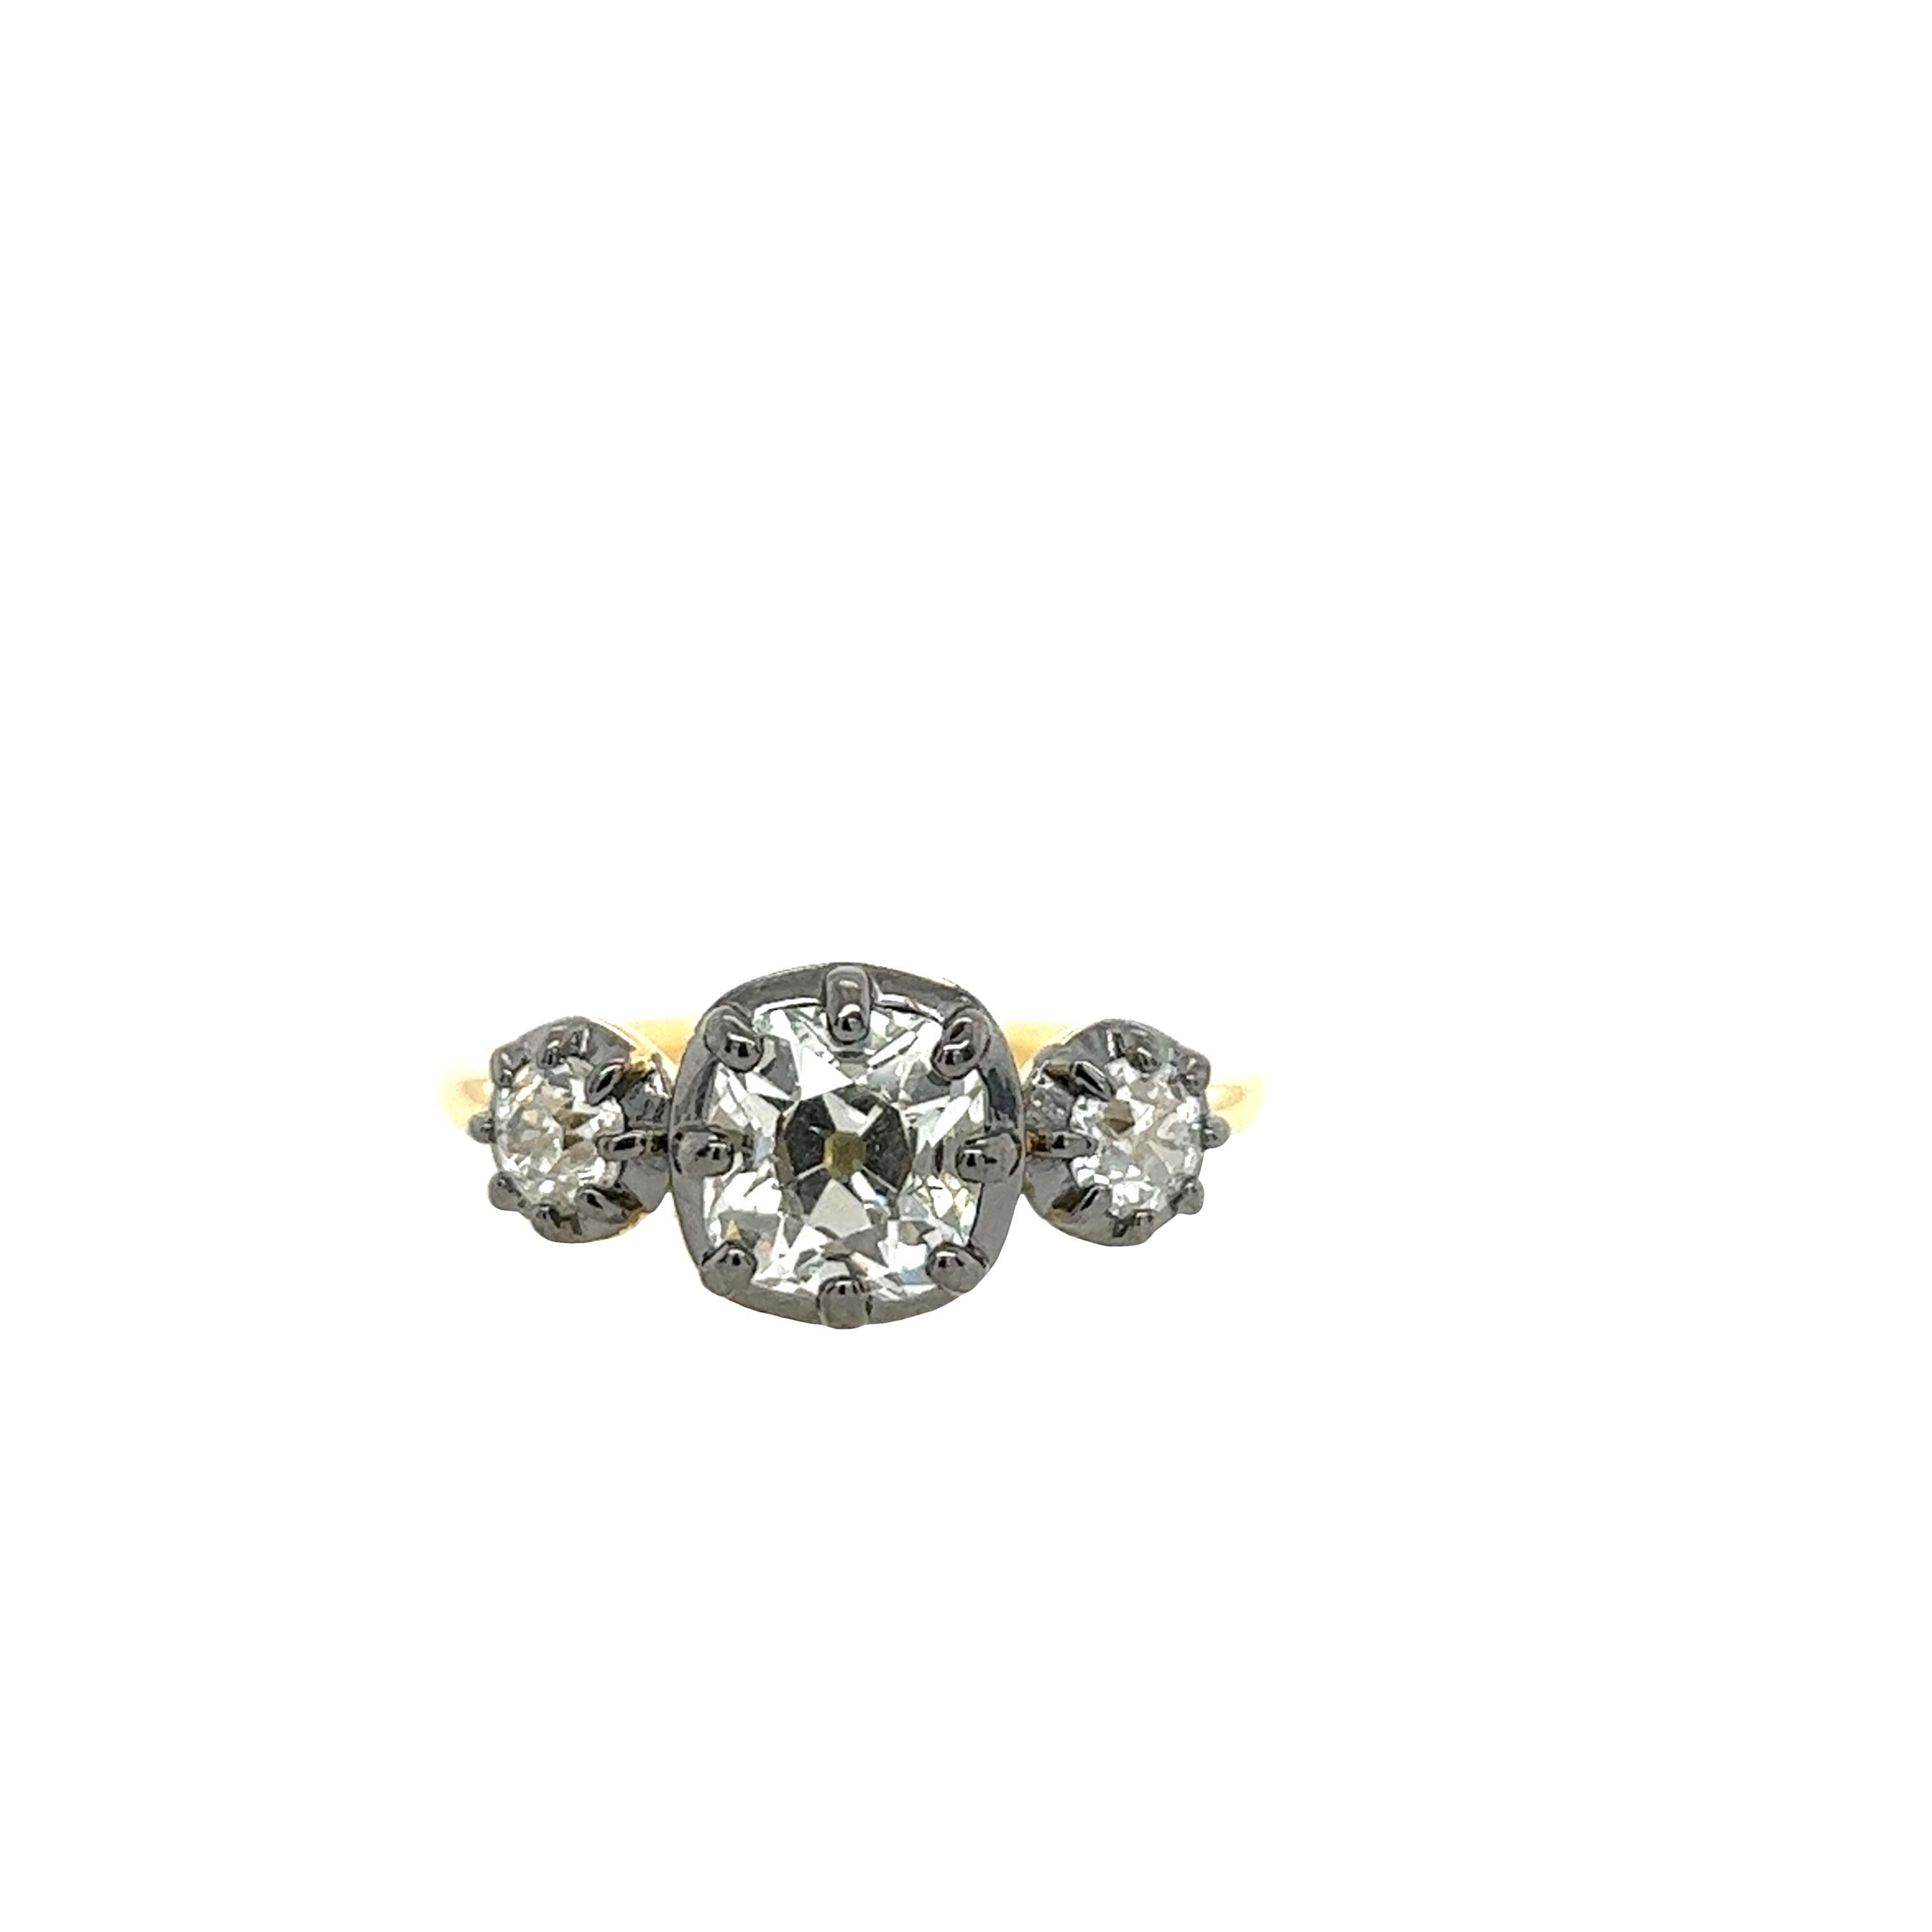 18ct Yellow Gold 3 Stone Diamond Ring, Set With 1.19ct Cushion Diamond & 0.42ct For Sale 1